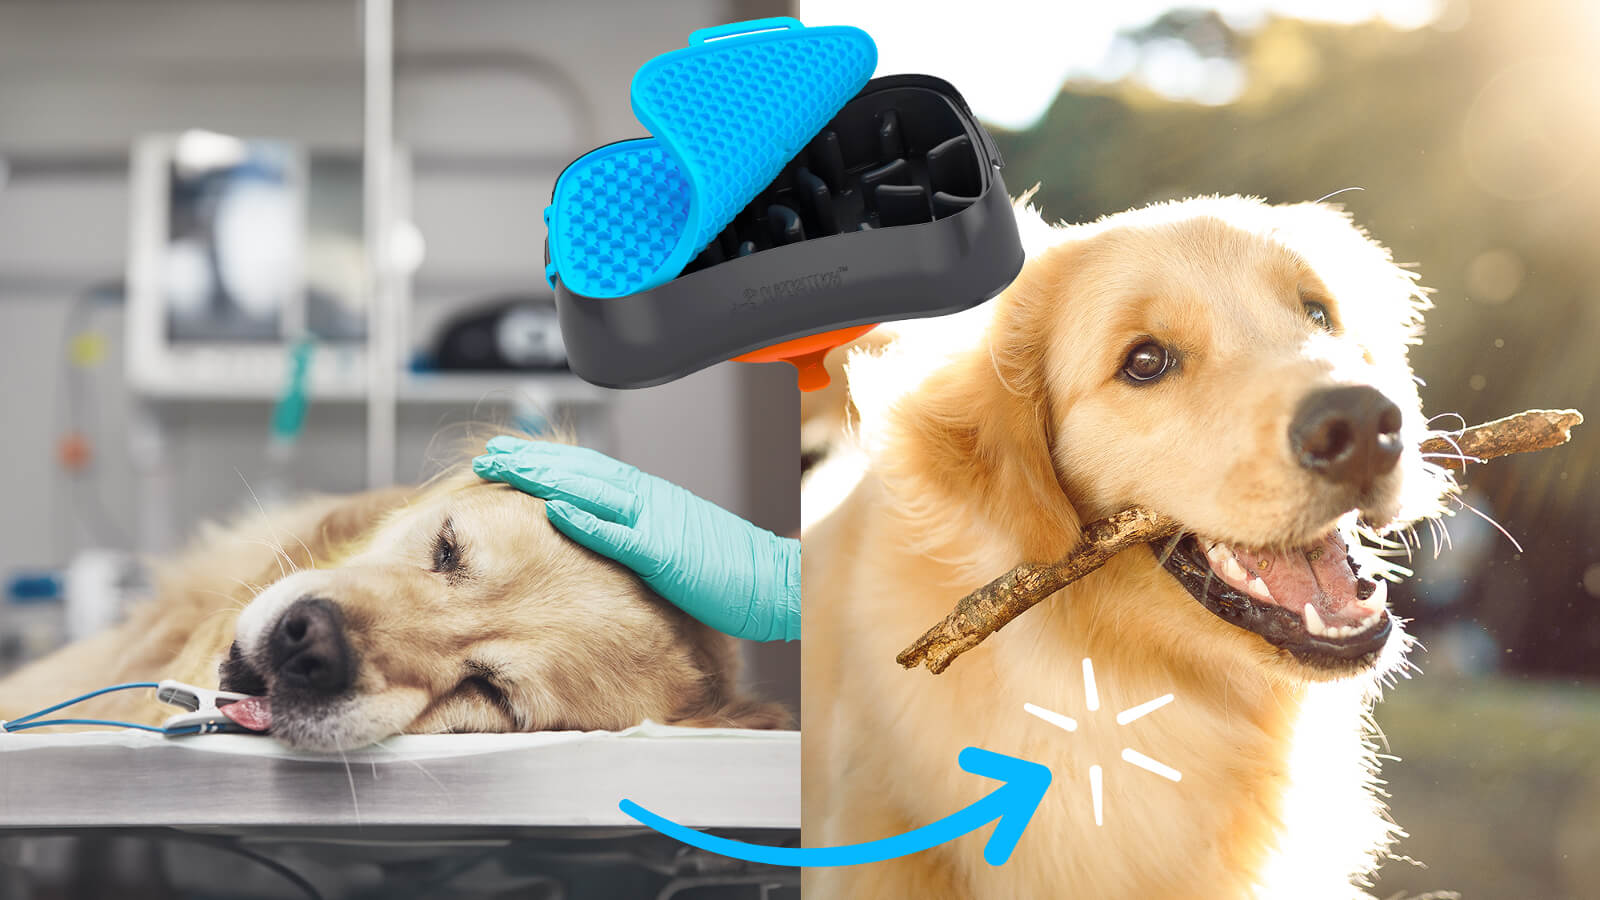 This New “Puzzle Bowl” Could Save Your Dog’s Life – And Save You From $4,000+ In Veterinary Costs!